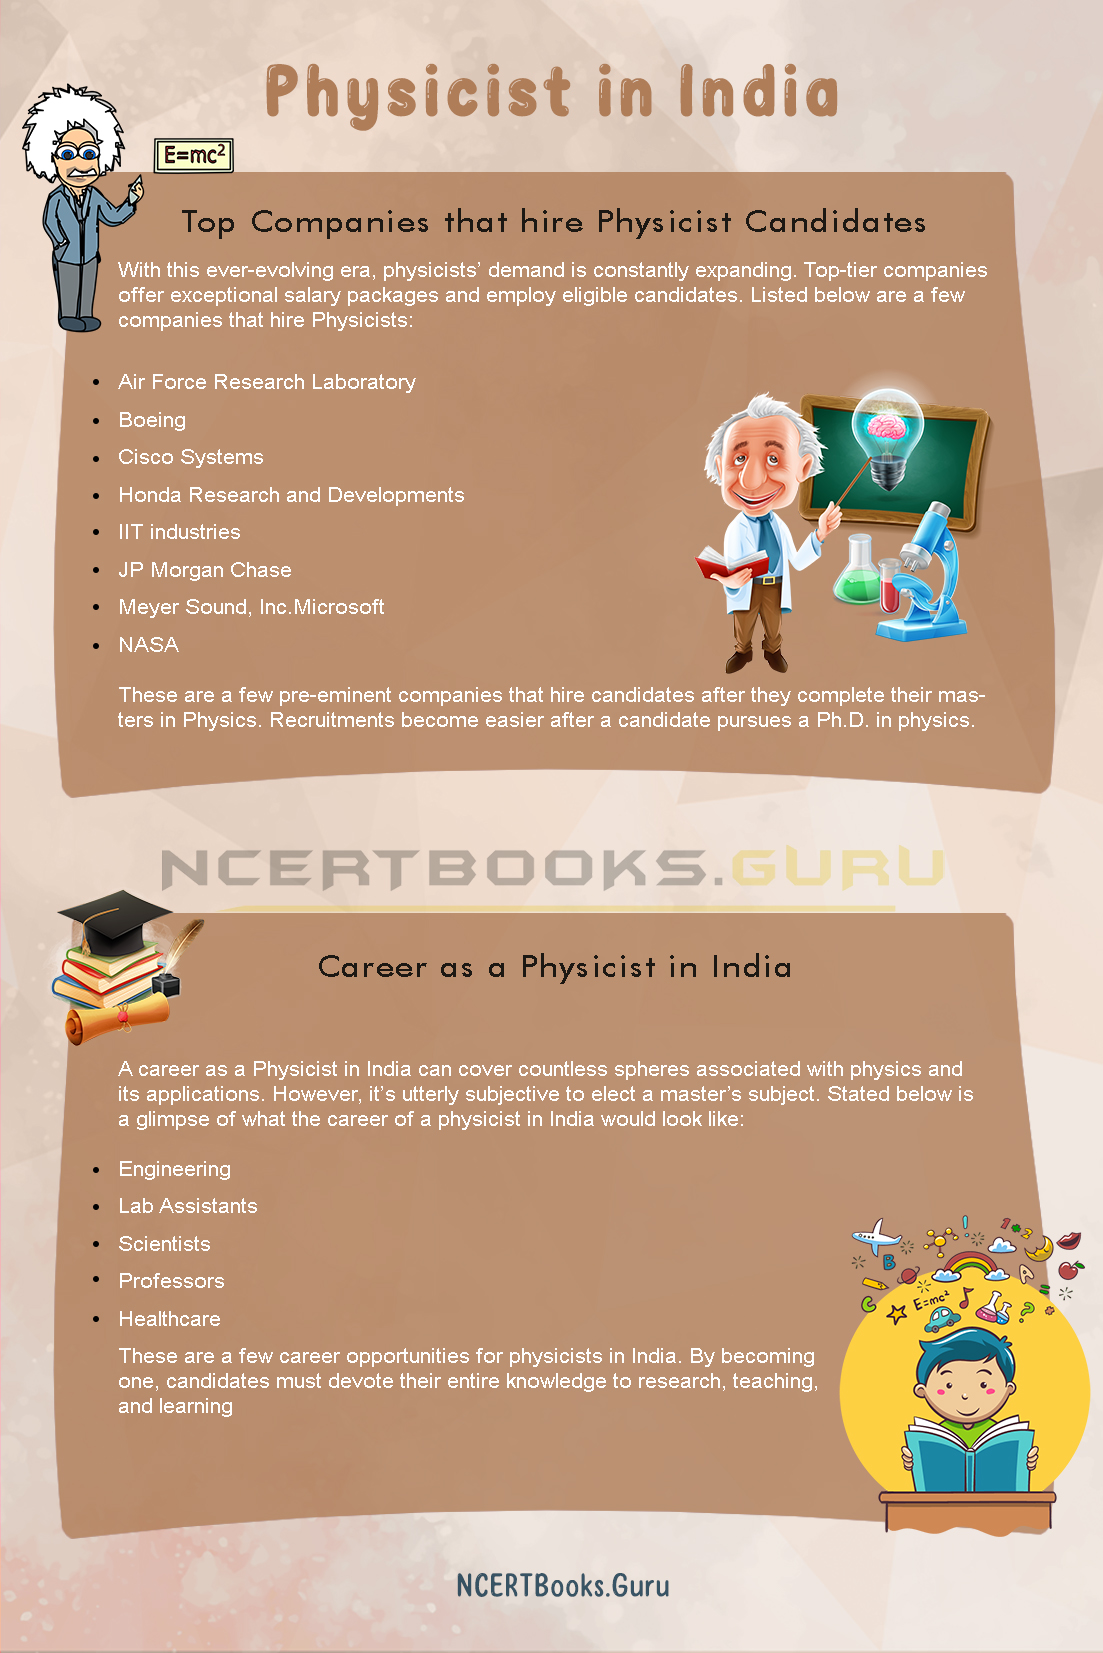 How Do I Become a Physicist in India 2